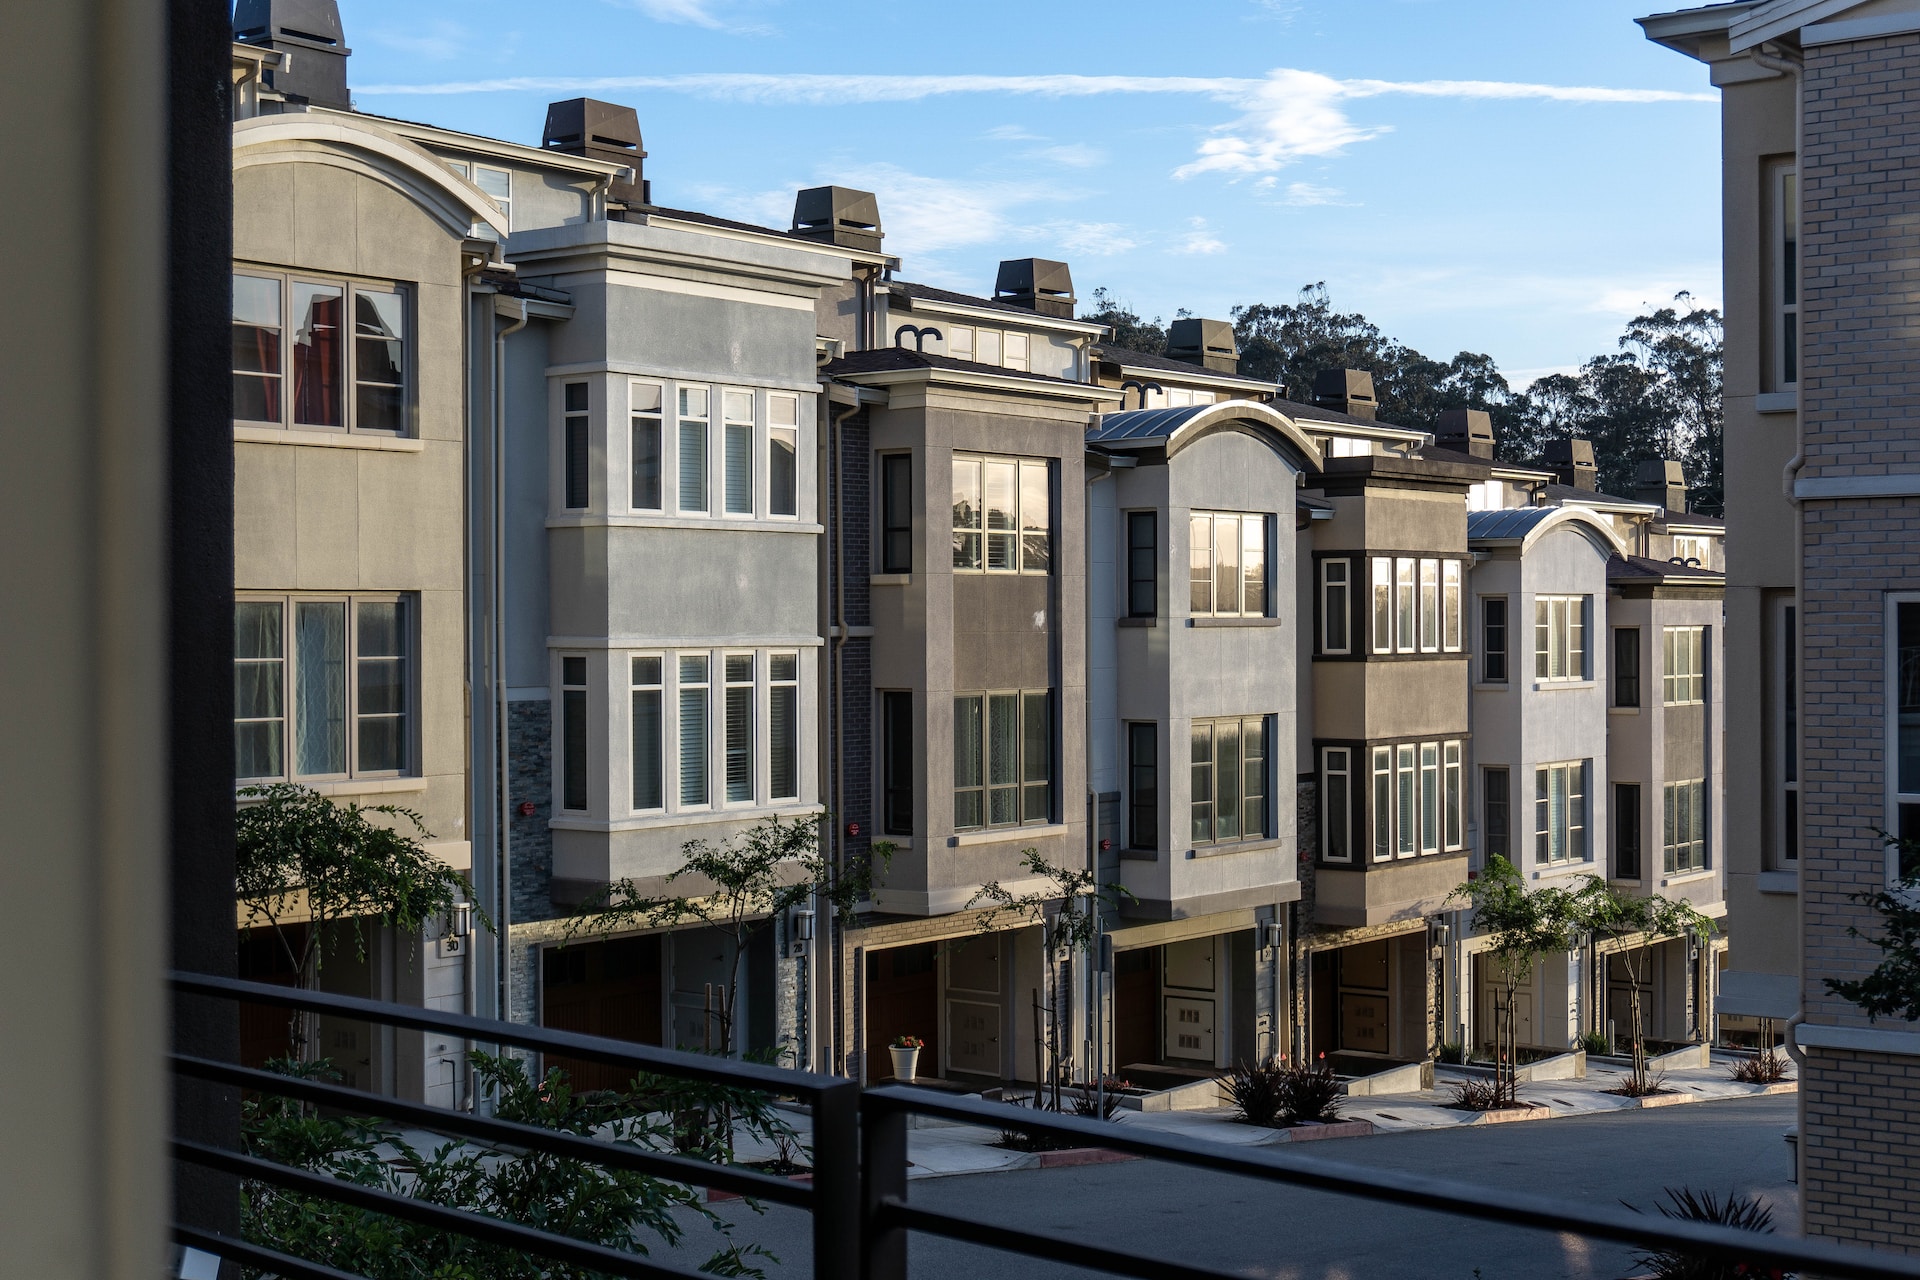 Townhouses record low home purchase transactions